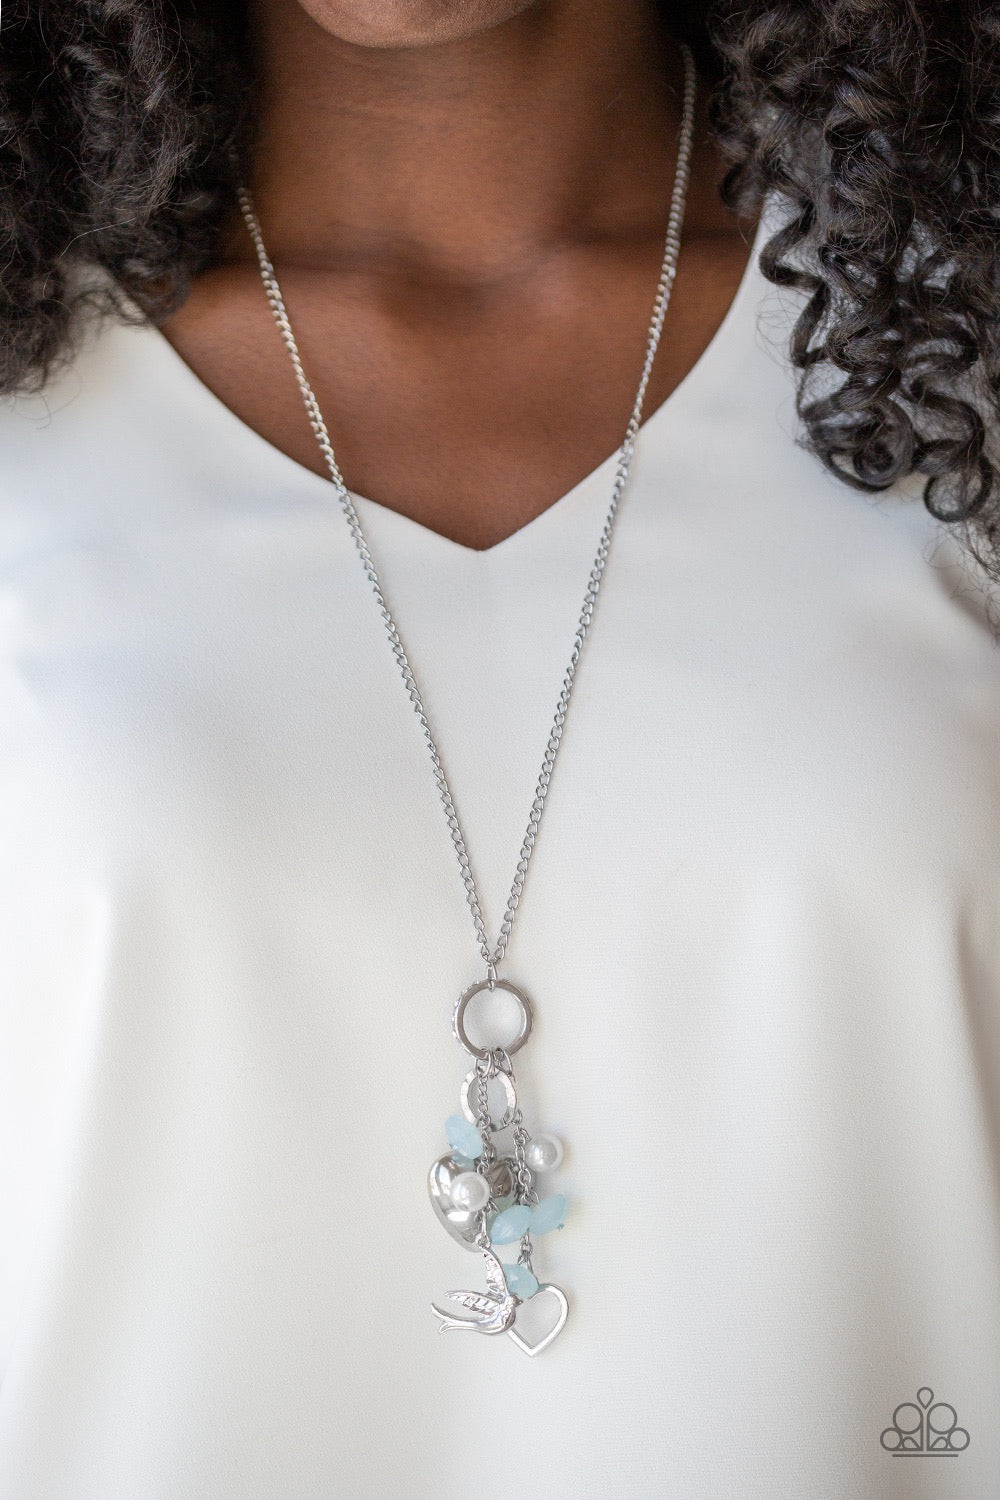 I Will Fly - Blue Necklace 1183N